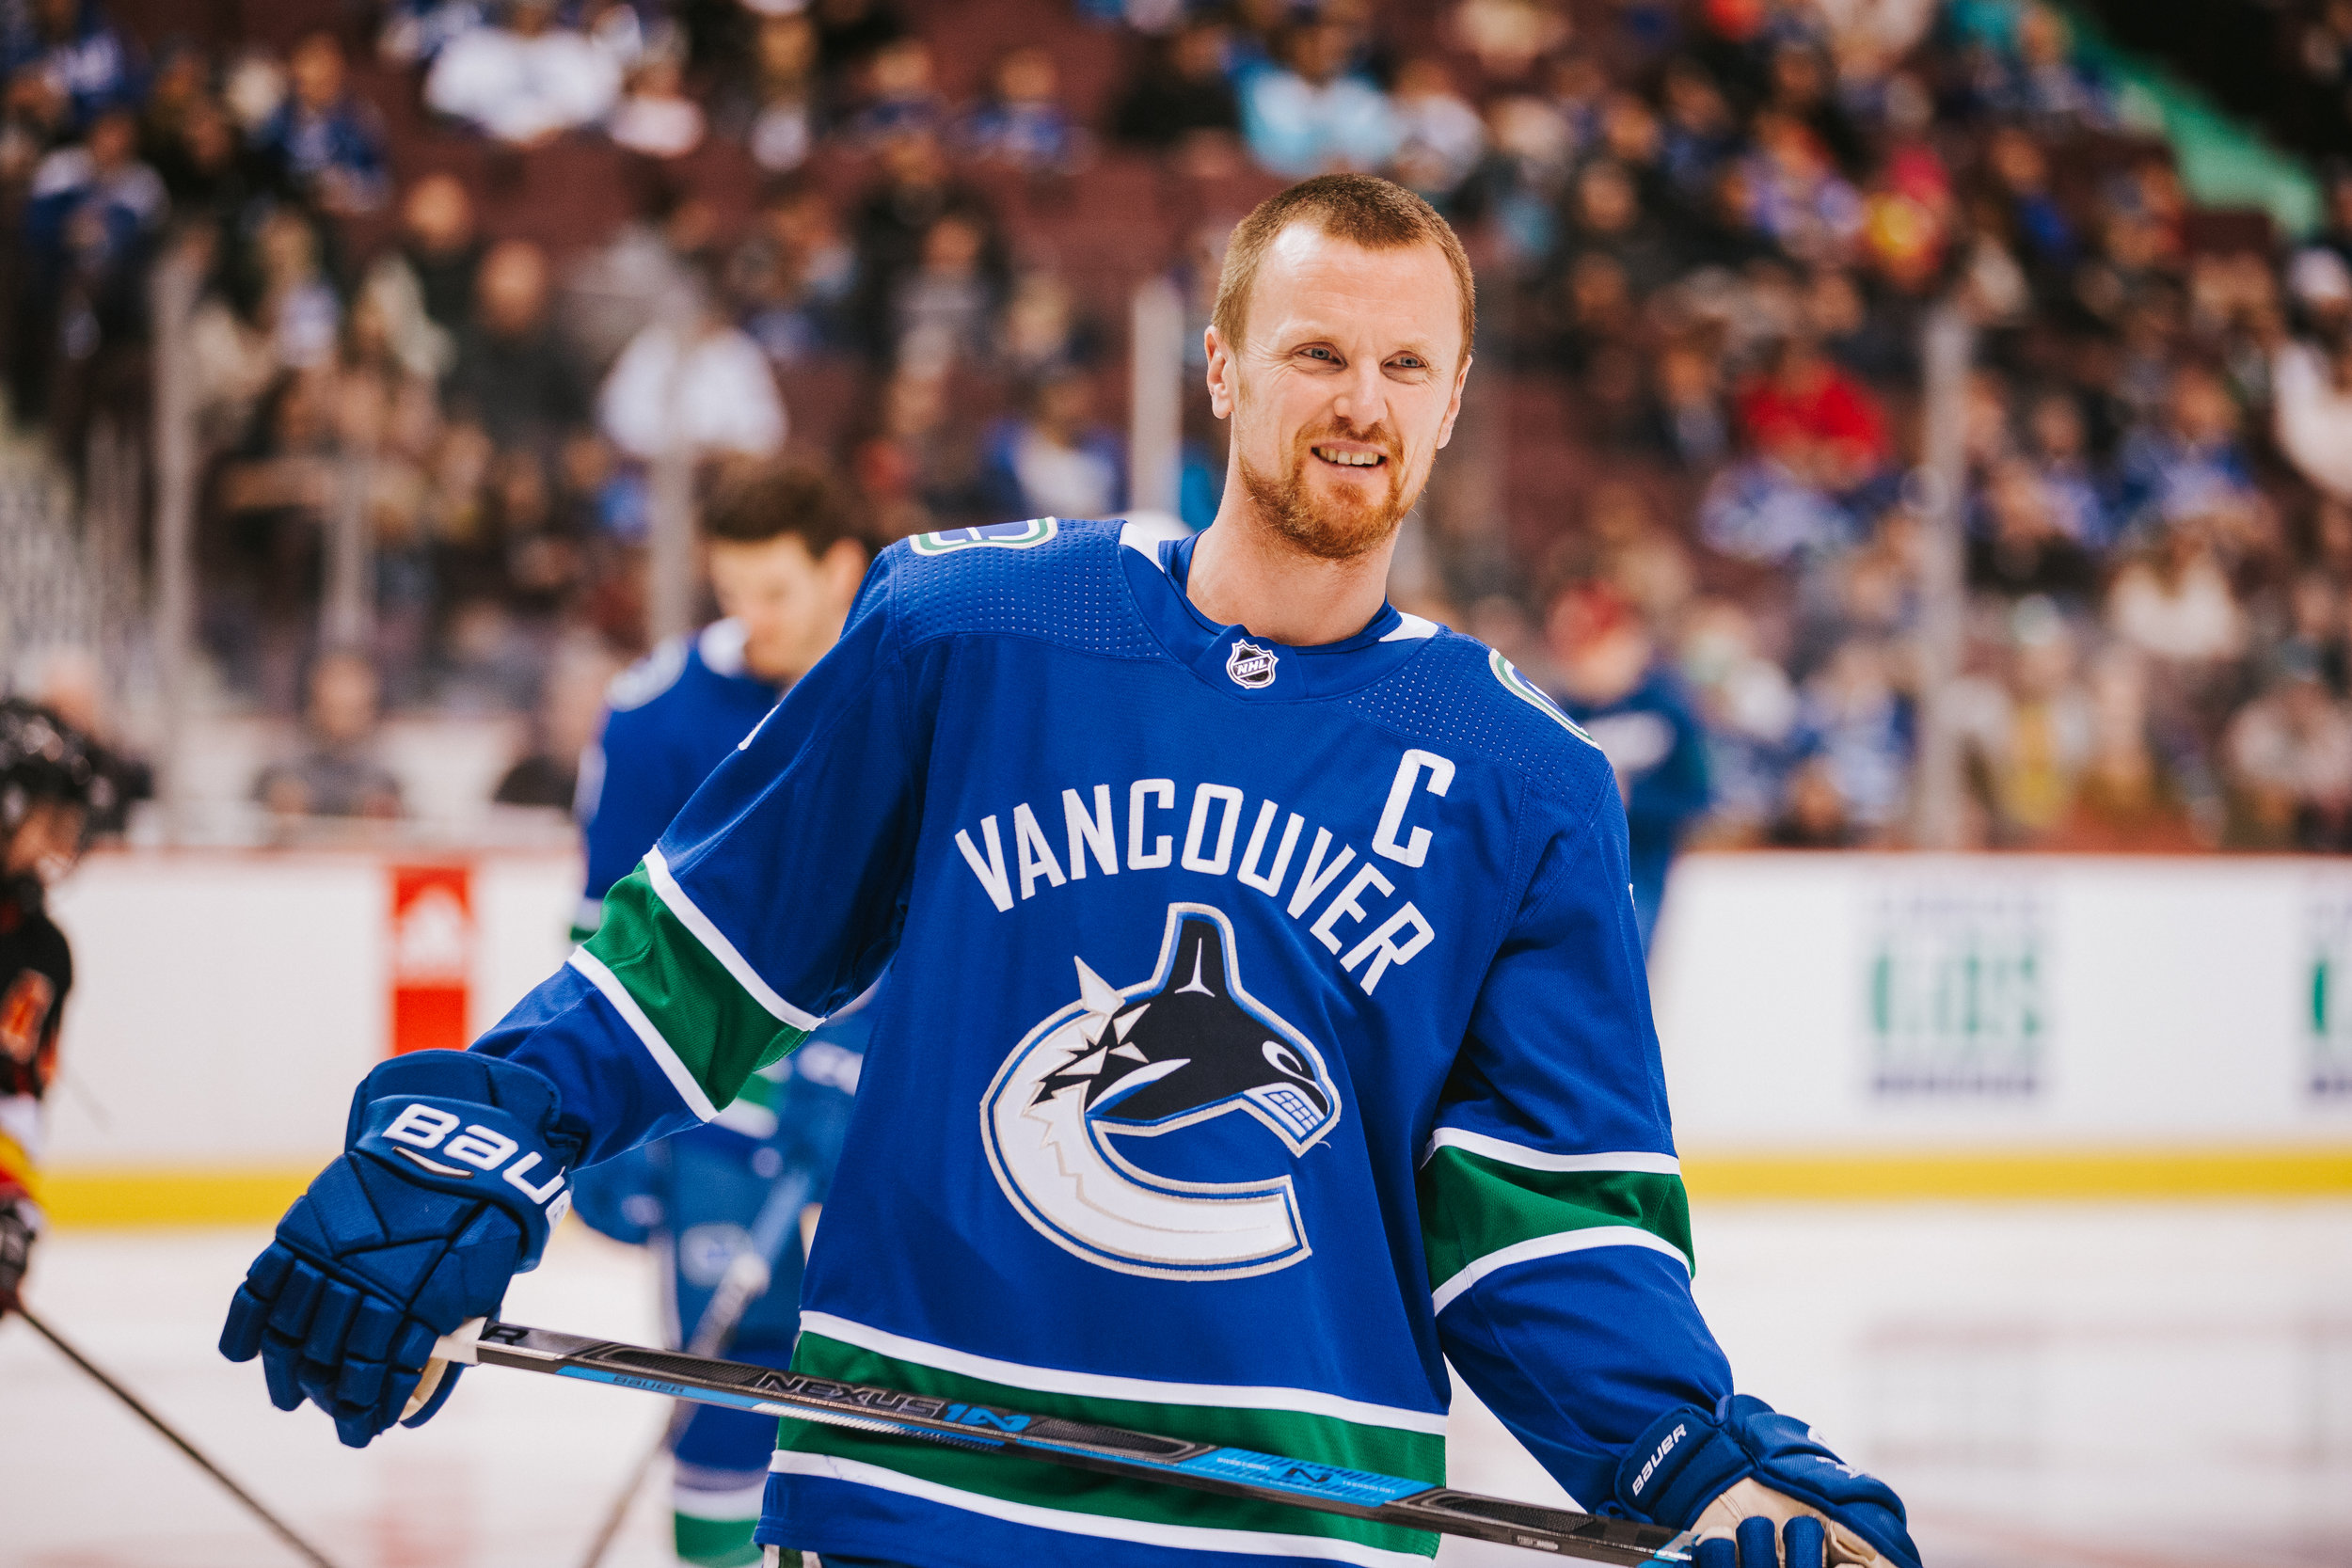 Canucks to celebrate Lunar New Year, Vaisakhi, and other special